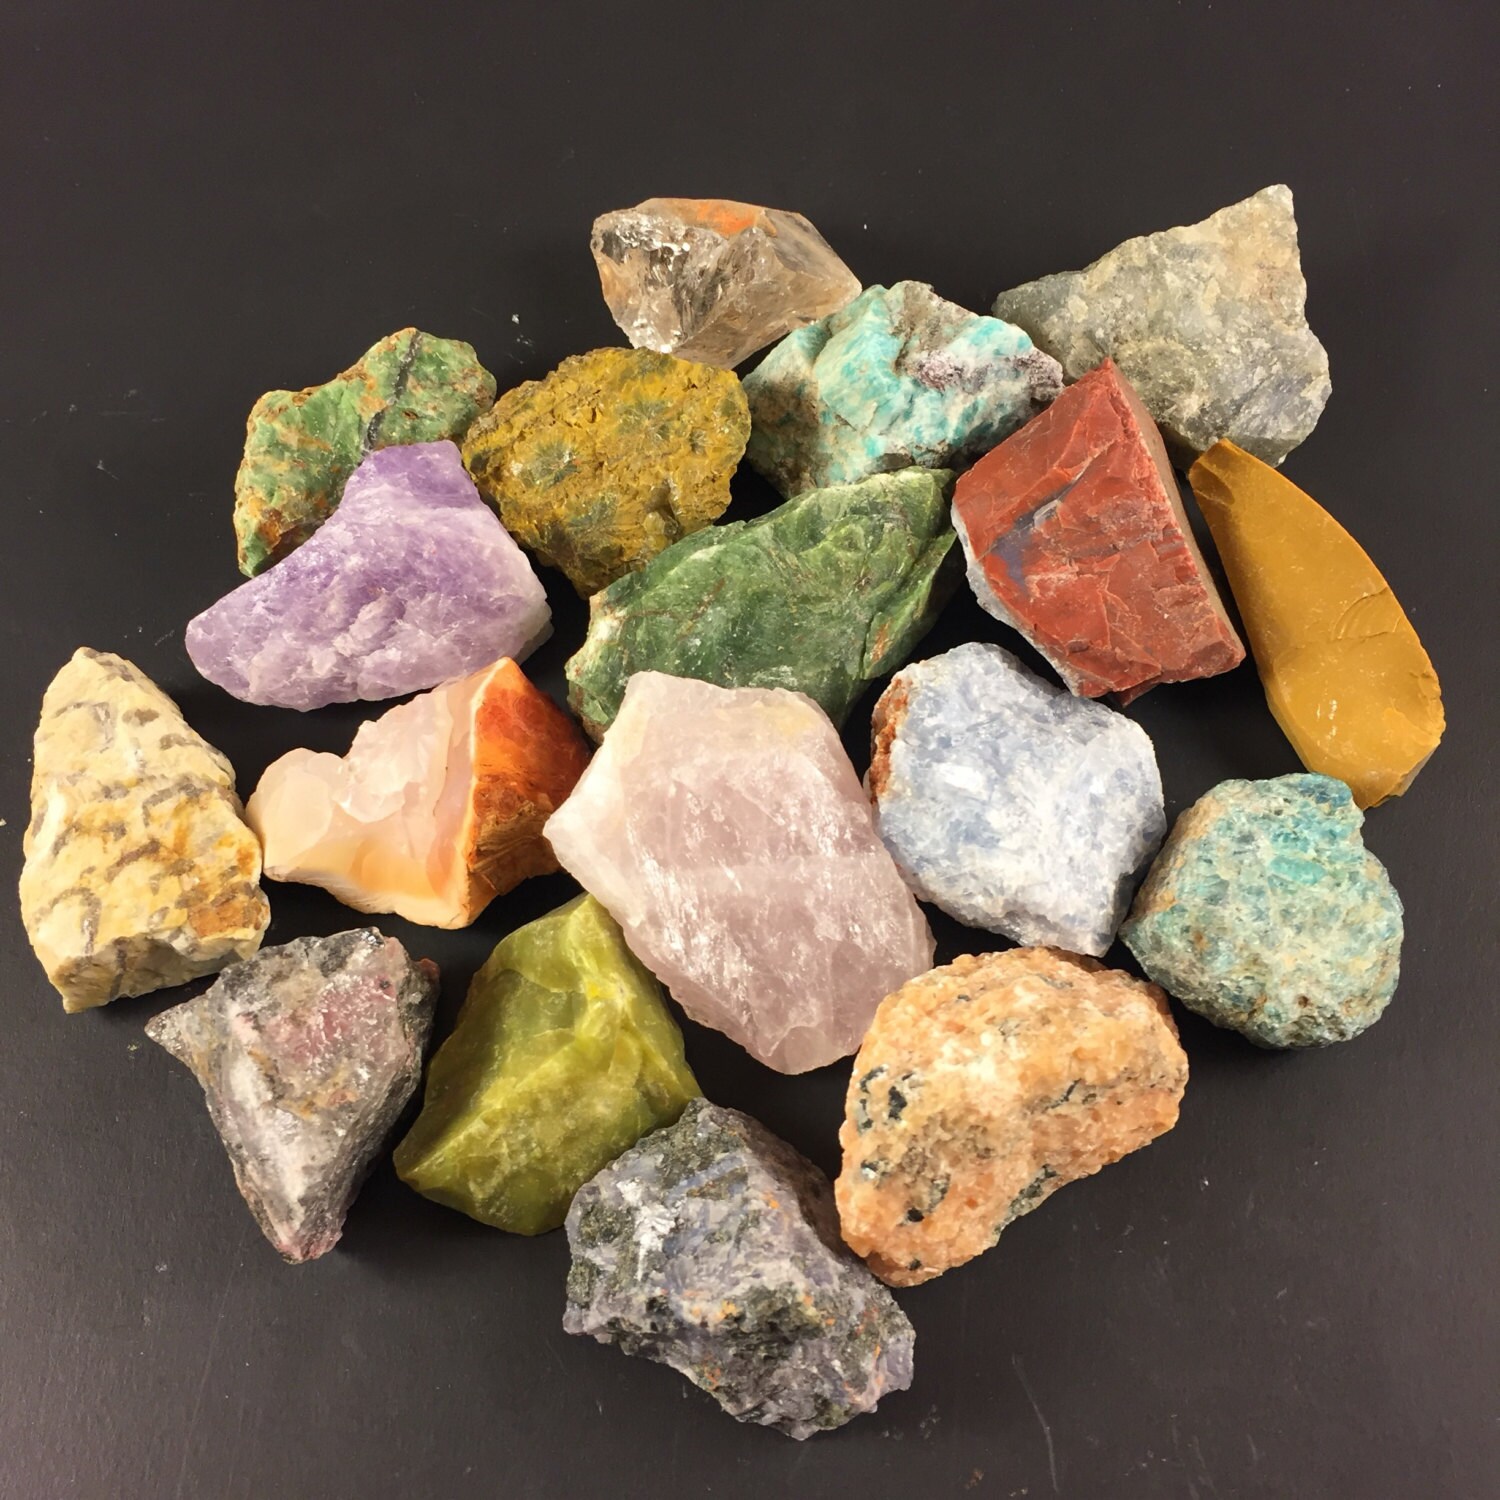 wholesale crystals and gems suppliers near me